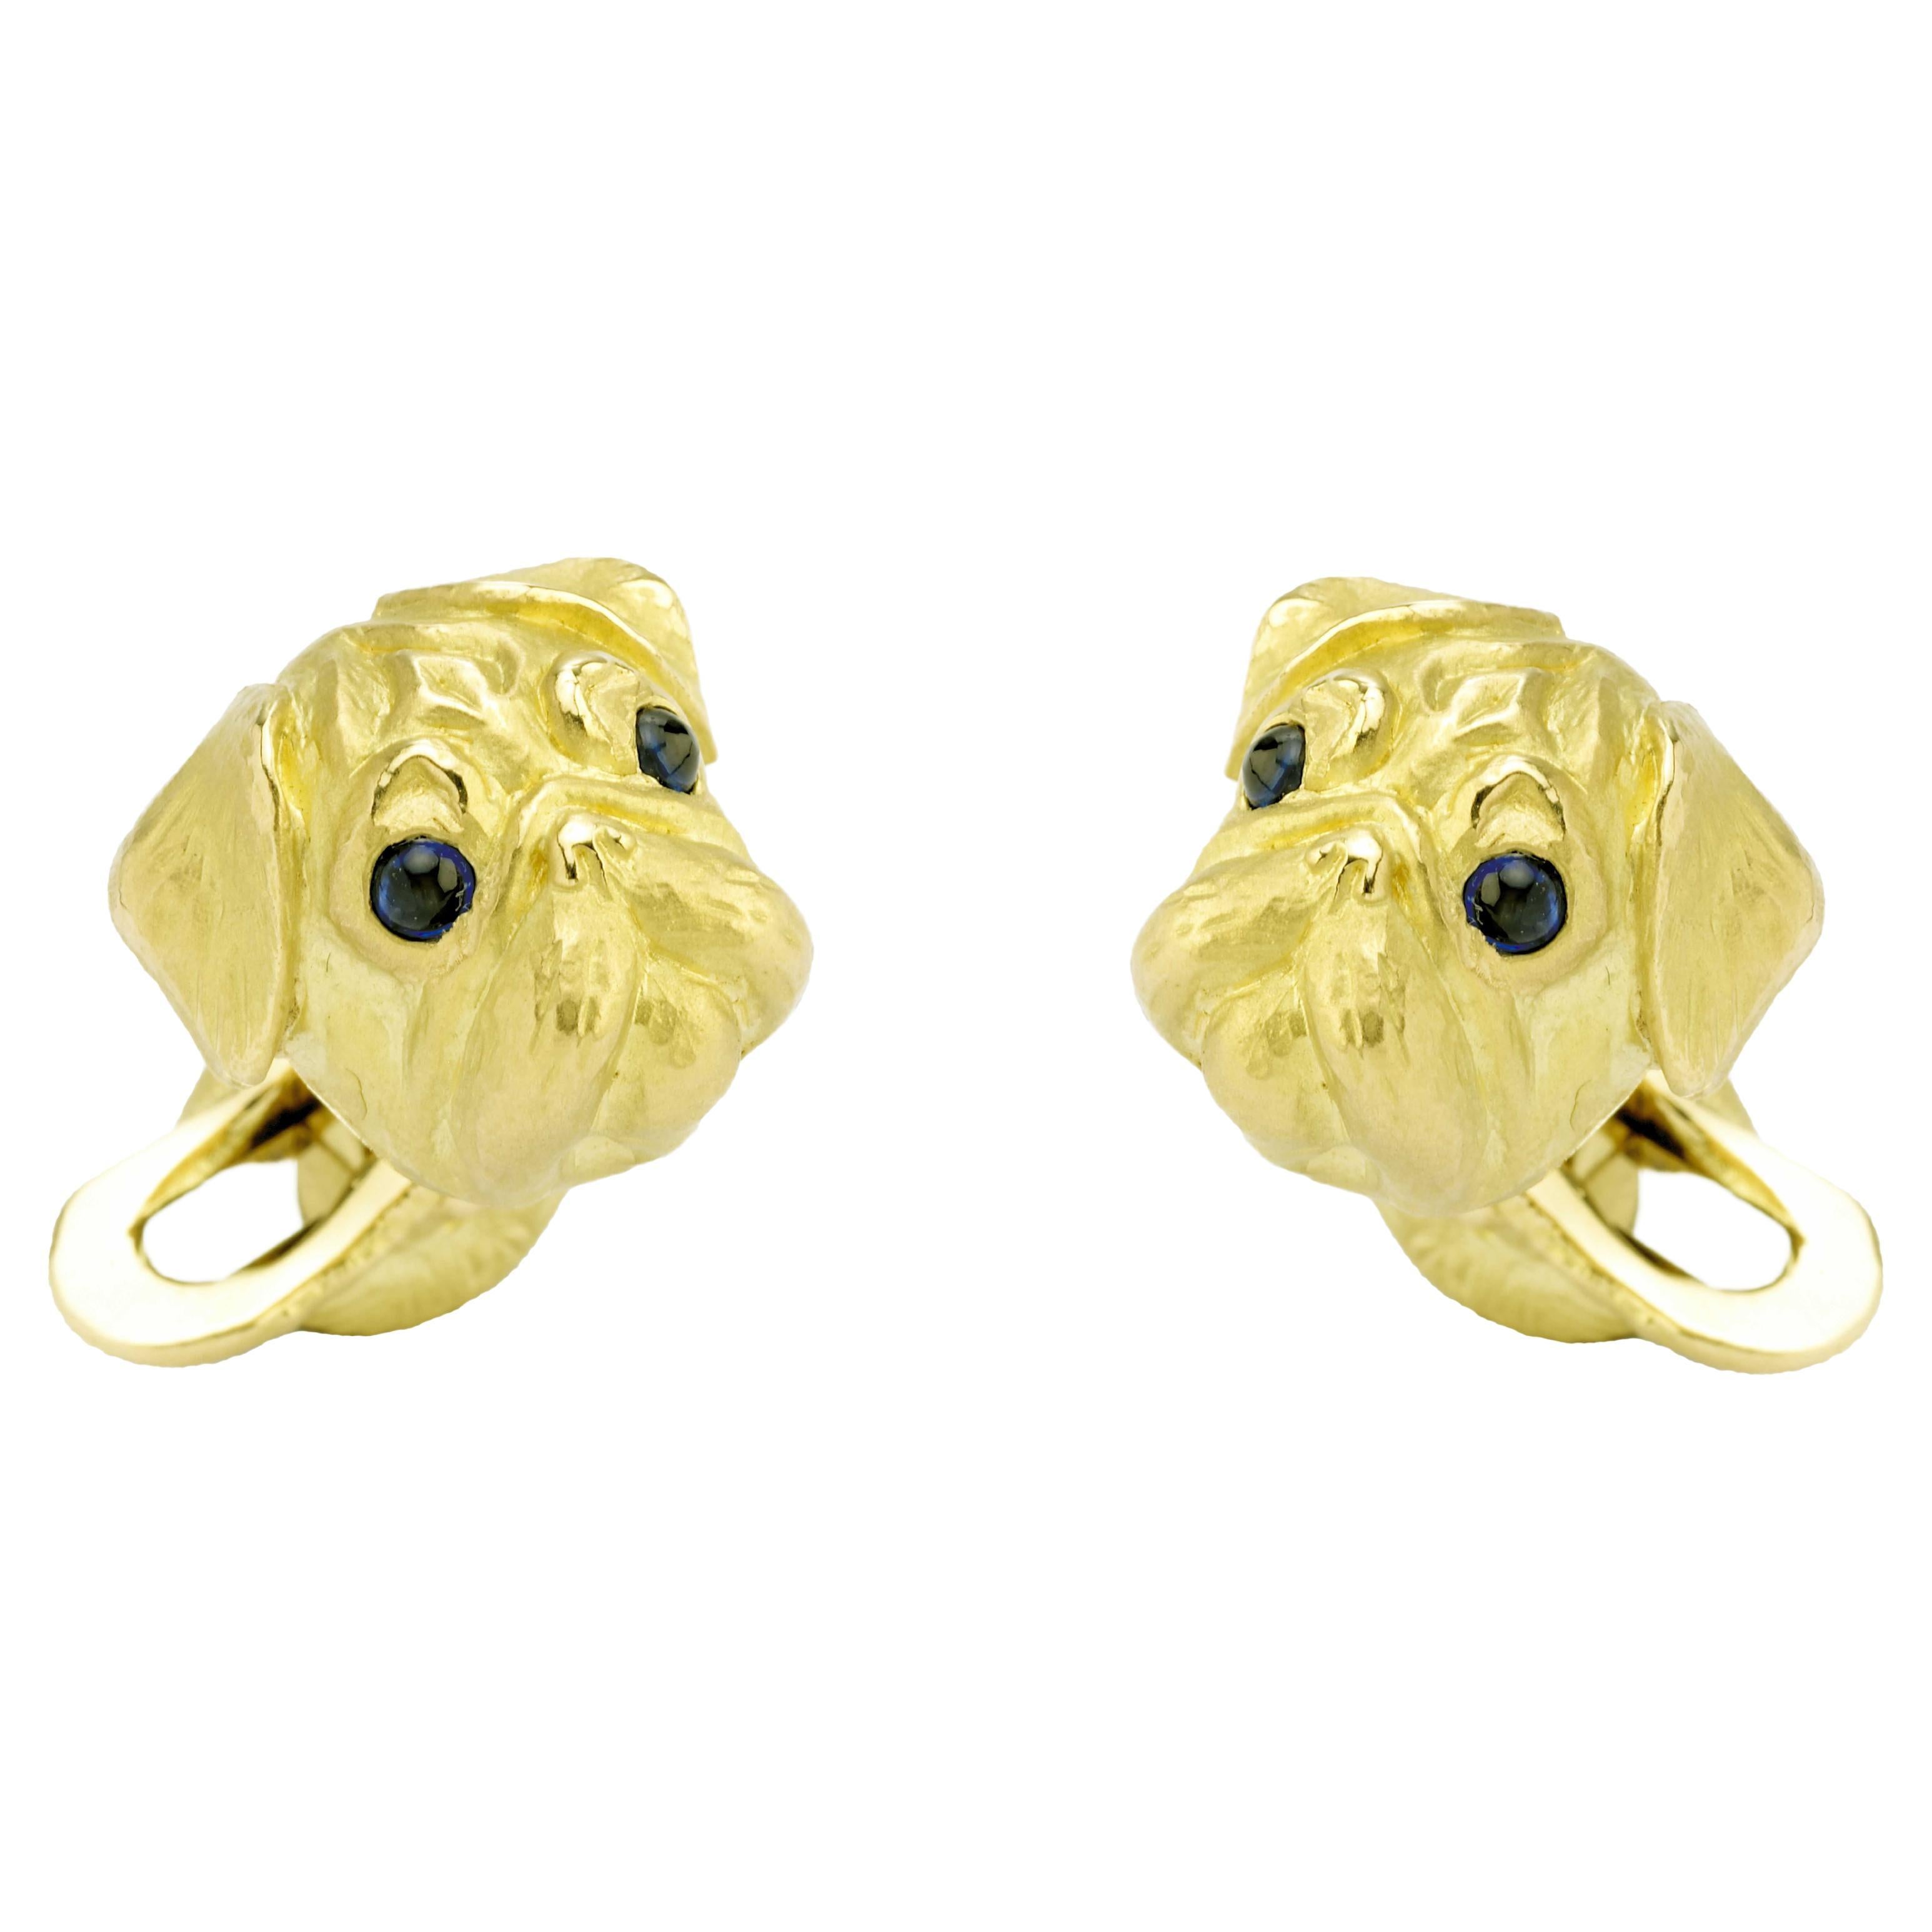 Deakin & Francis 18ct Yellow Gold Pug Cufflinks with Sapphire Eyes